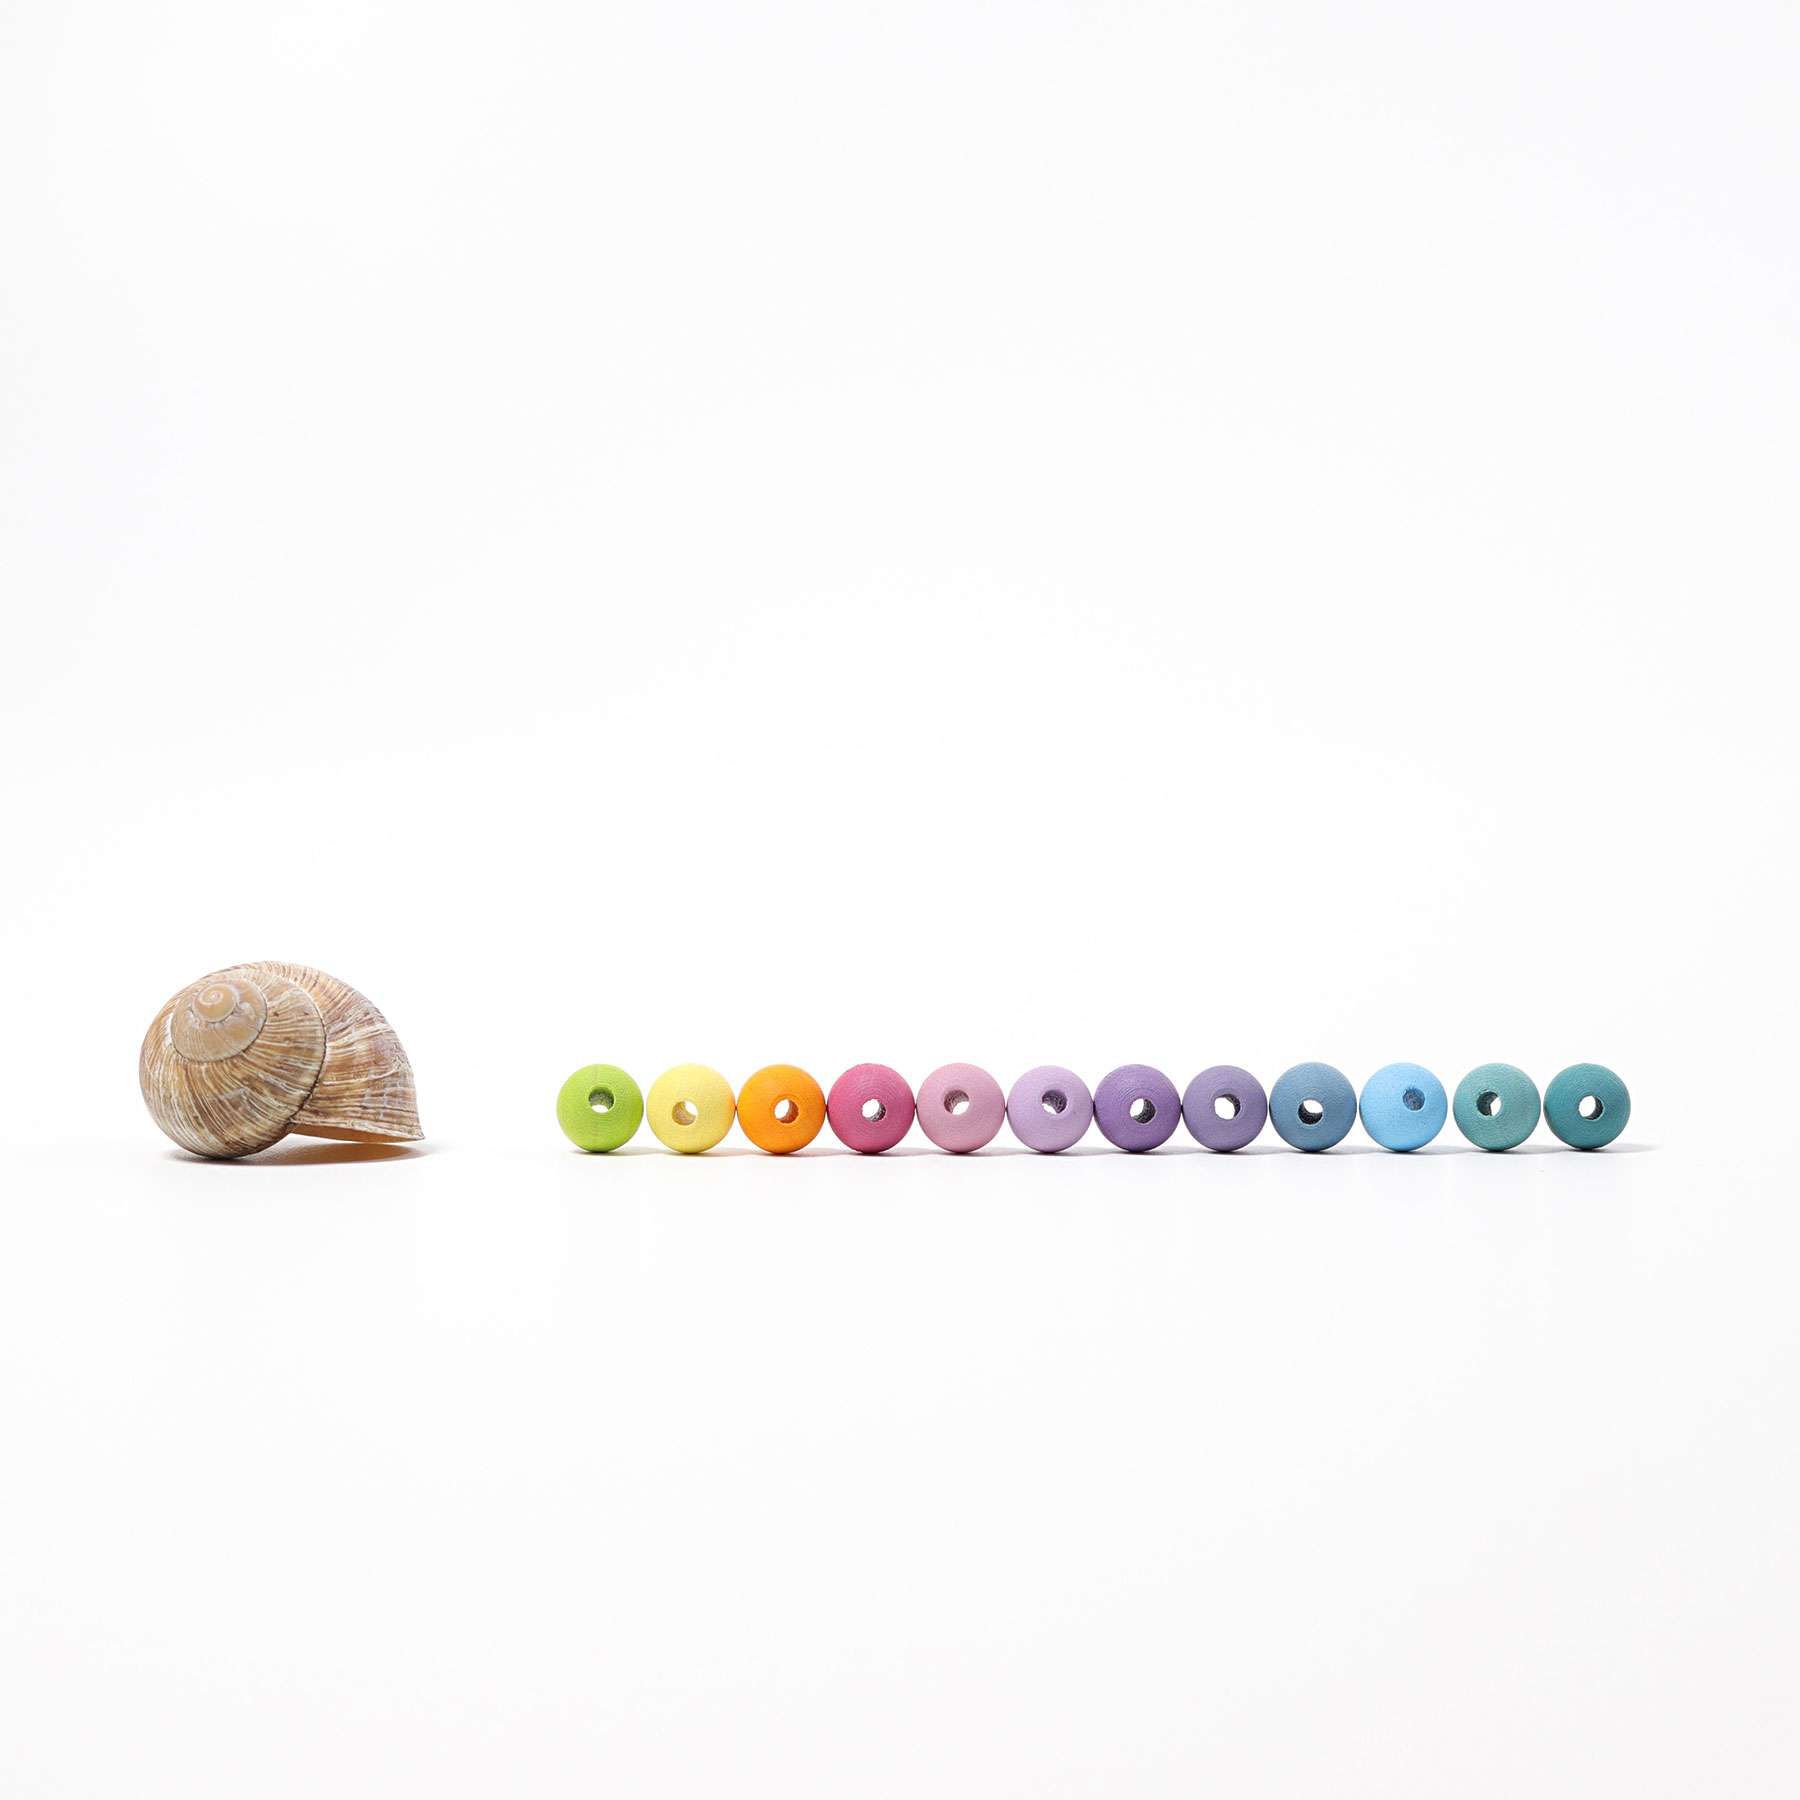 10259 Grimms 120 Small Pastel Wooden Beads (1)